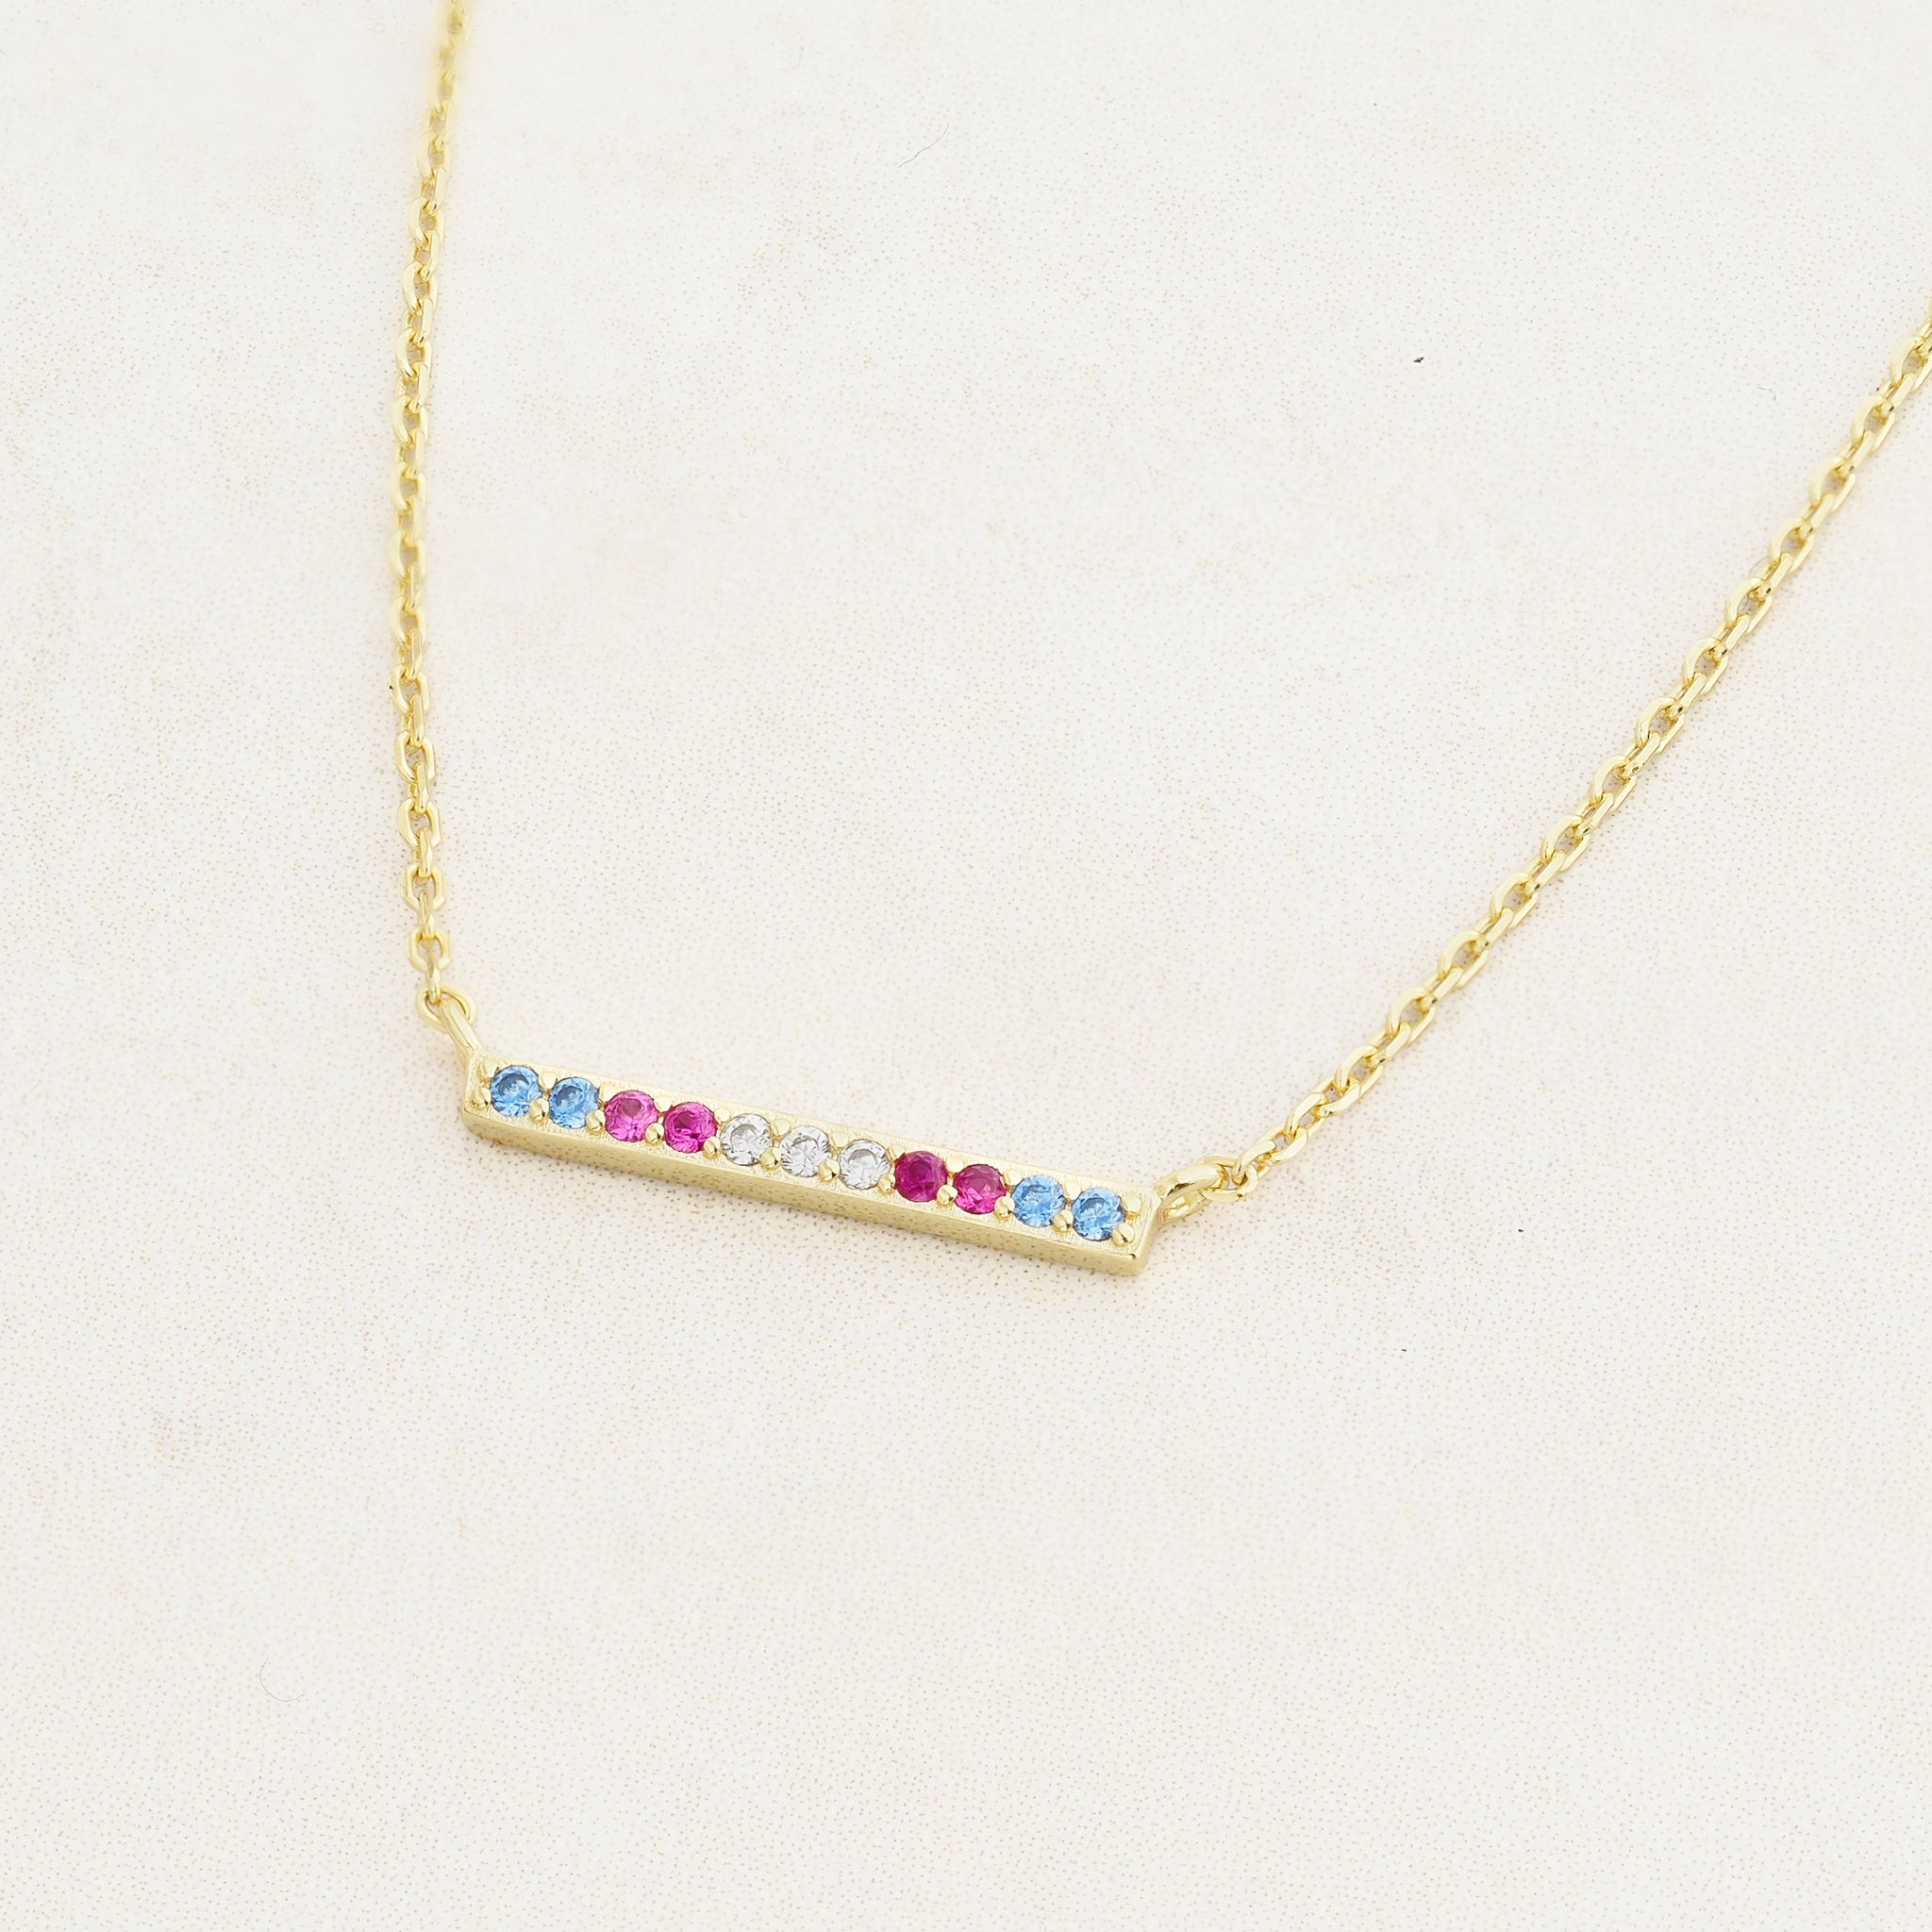 Transgender necklace, pride jewelry, featuring colours from the transgender flag, wide